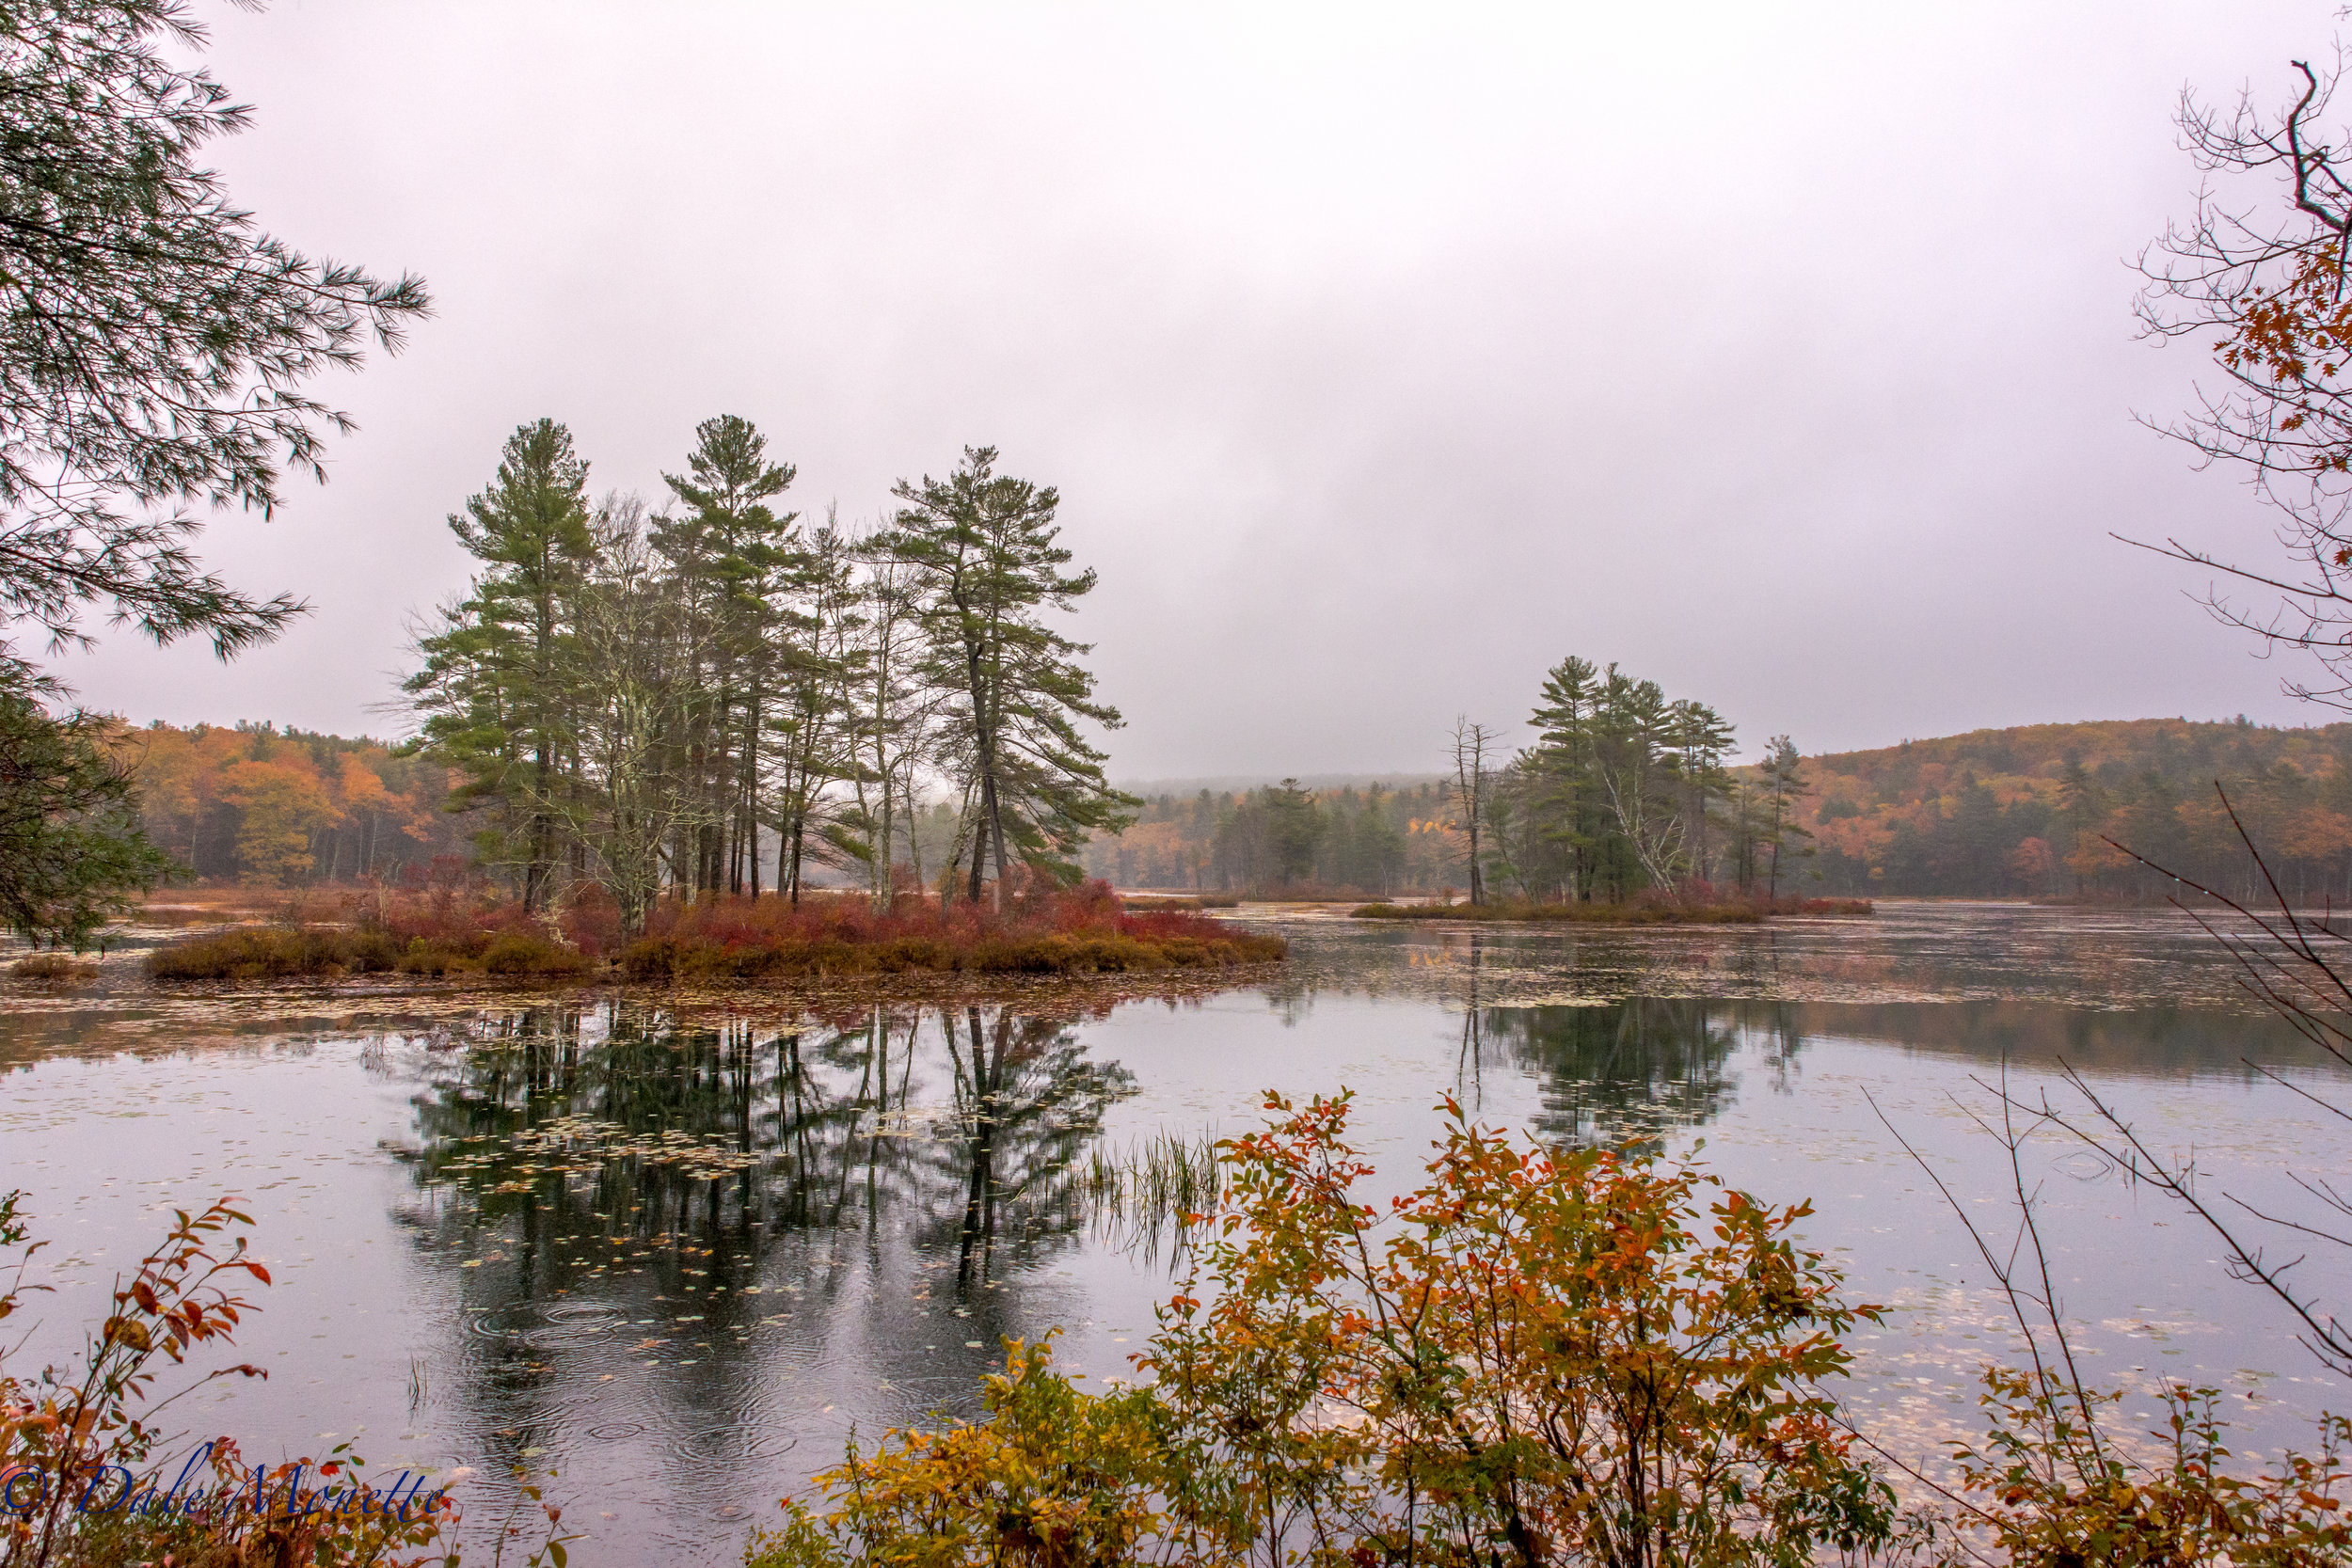   There was a light mist to everything this morning. &nbsp;Sometimes I find this better for scenics than direct sunlight. &nbsp;I love the softness that foggy, misty days can bring to photographs. &nbsp;Harvard Pond, Petersham, MA. &nbsp;10/22/16  